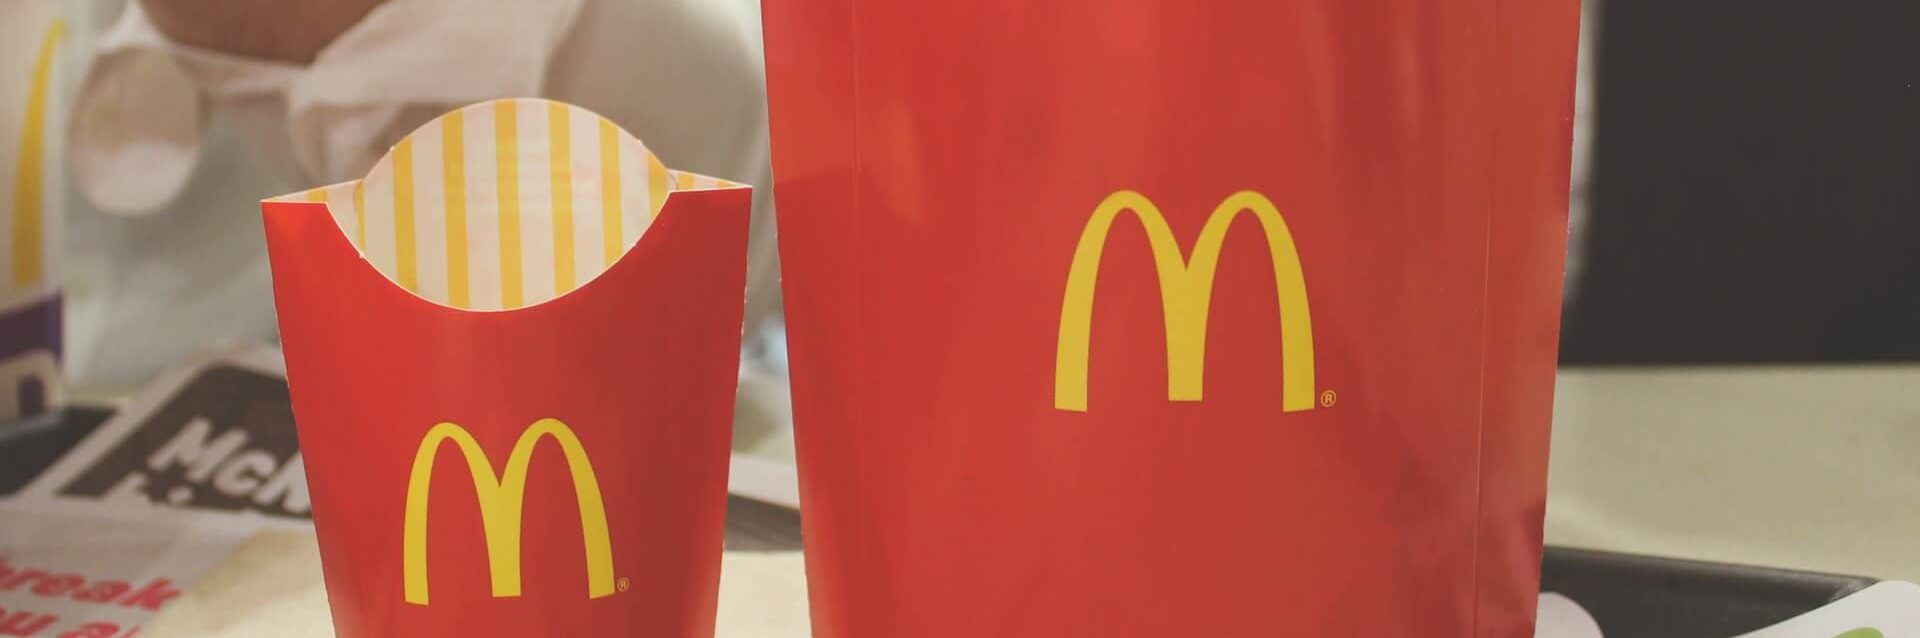 Teachers and School Employees in New York Can Get Free McDonald's